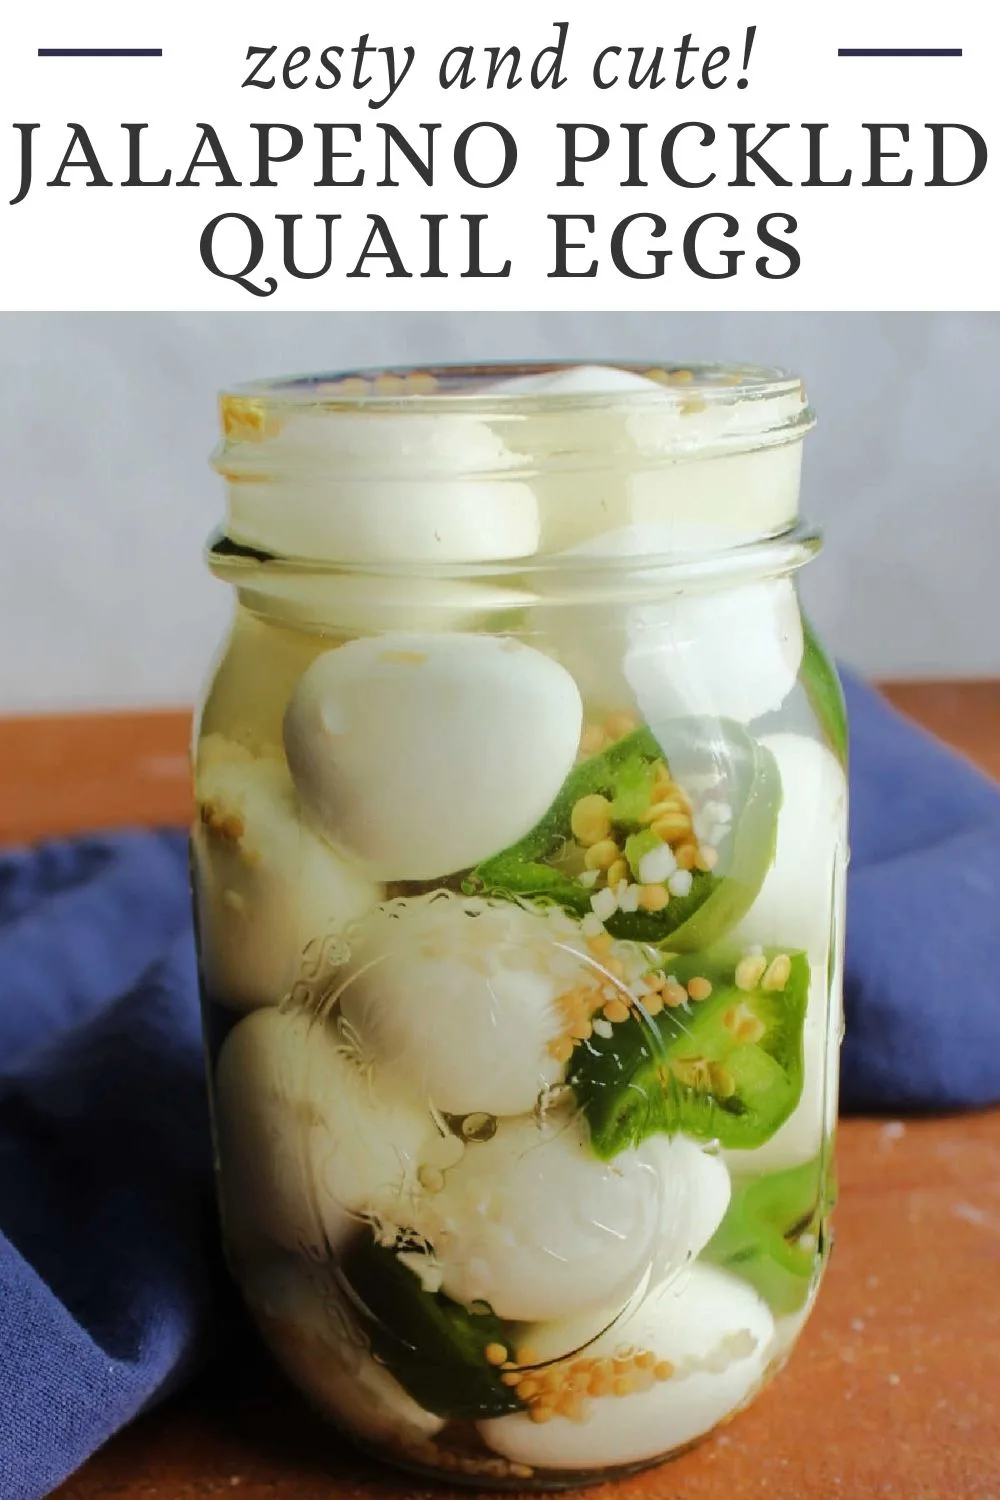 Jalapeno pickled quail eggs are the snack you didn't know you need. The cute little bites have just enough spice and plenty of protein, plus they are pretty simple to make.